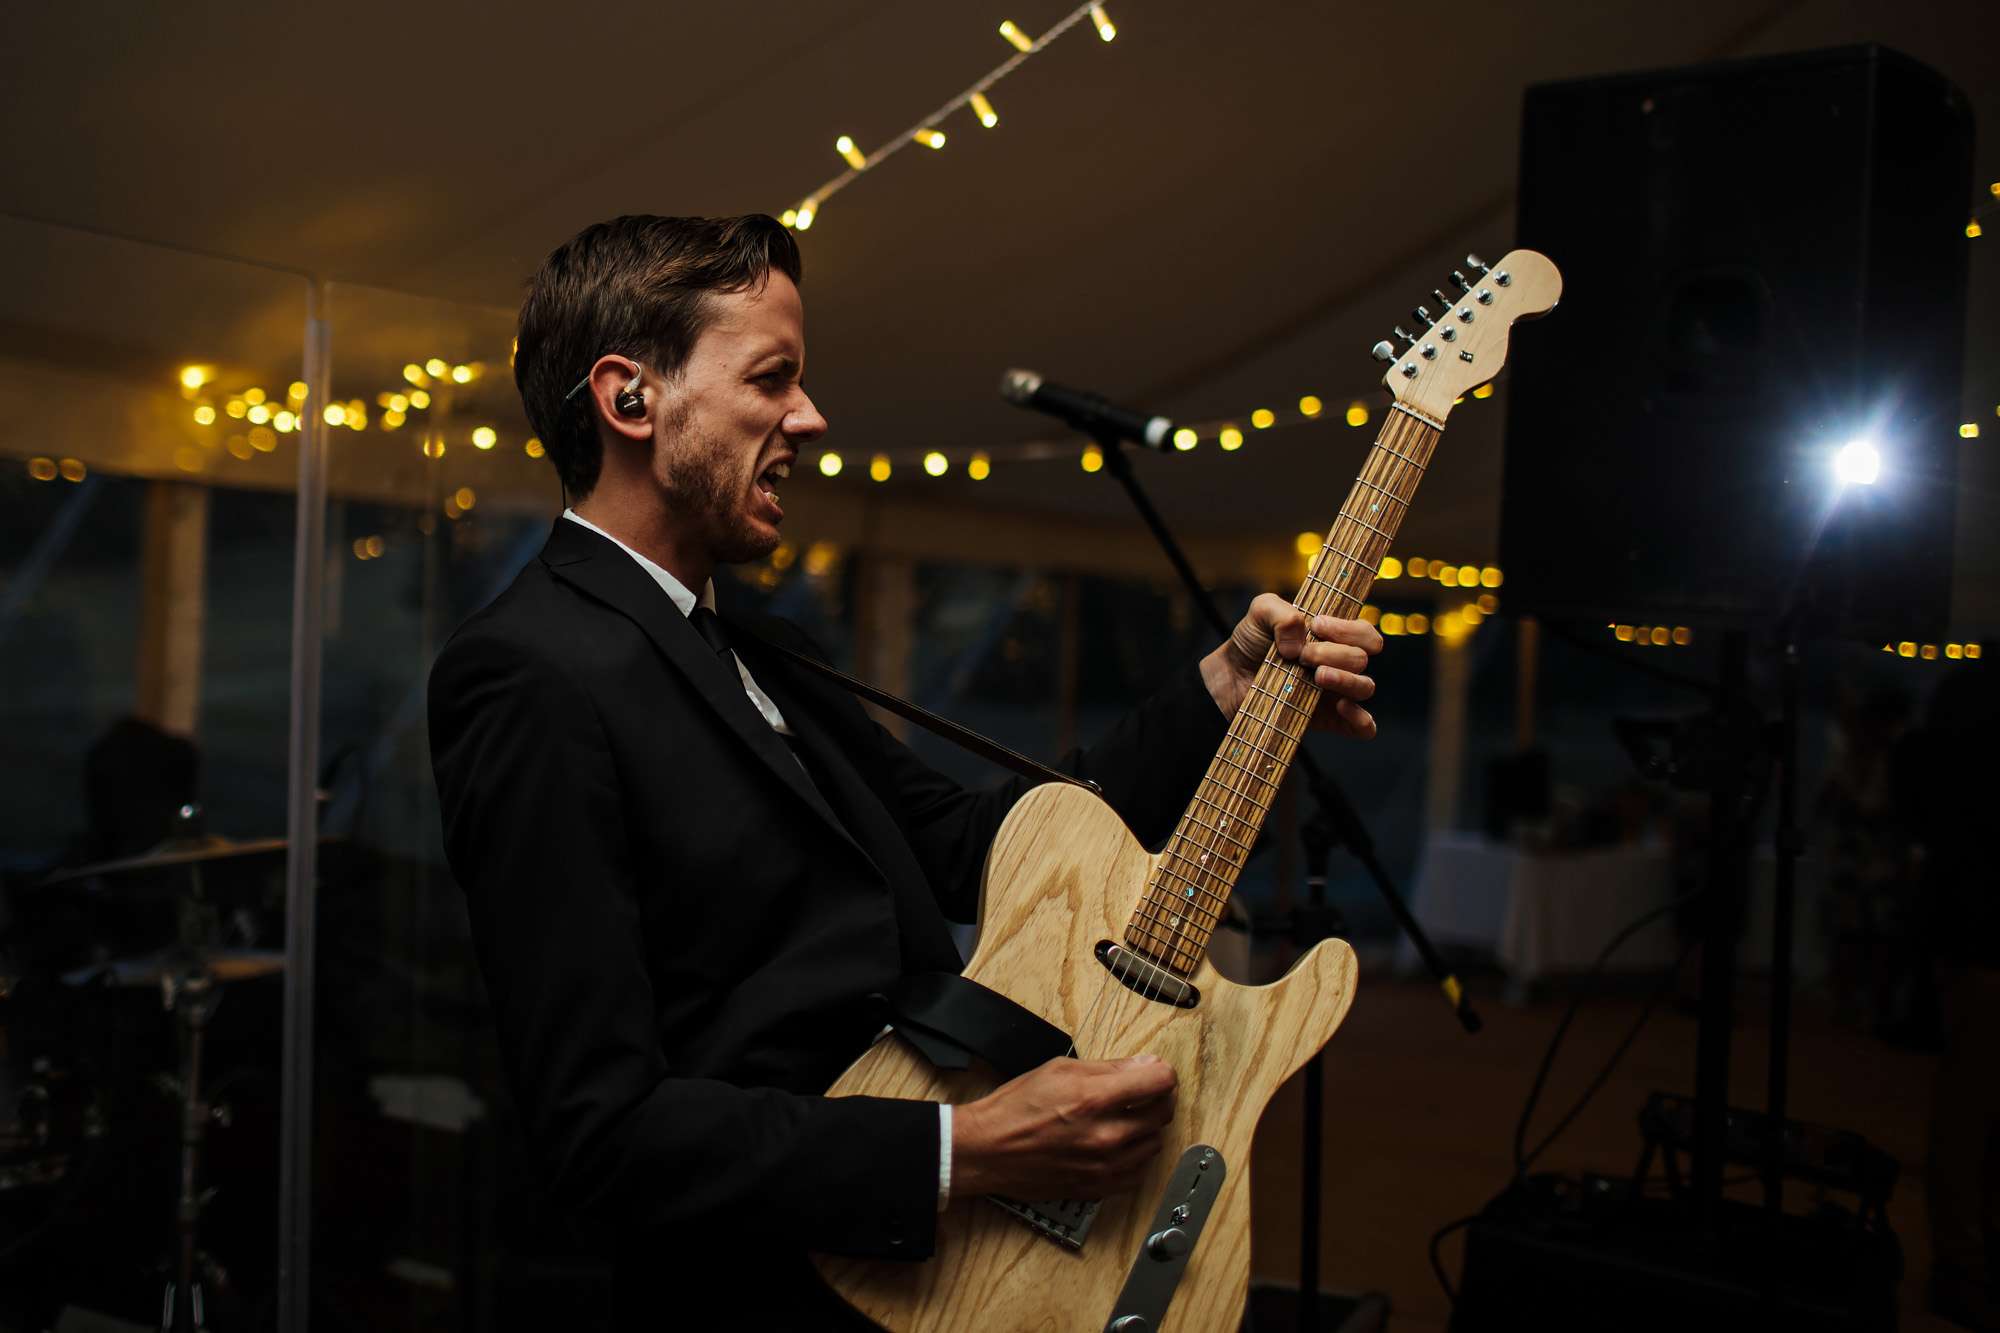 Guitarist performing at a wedding at Fixby Hall